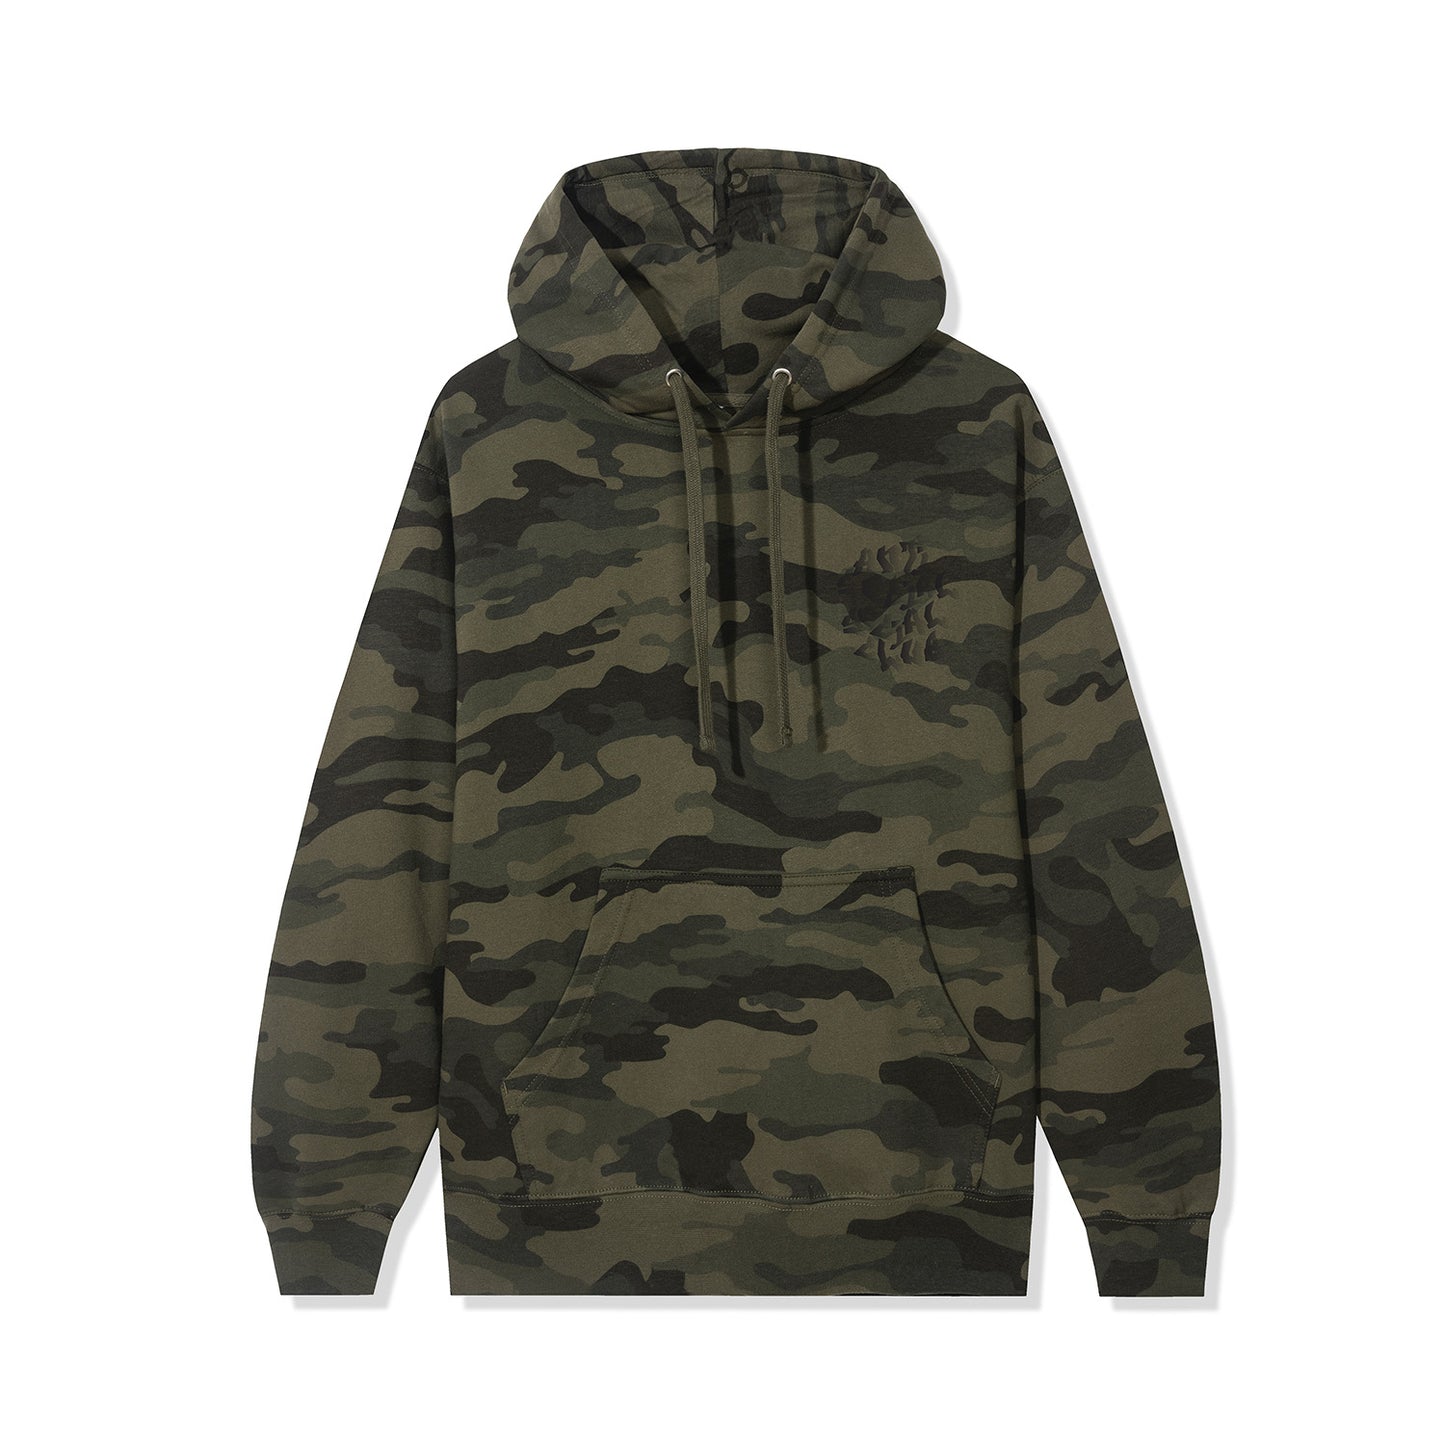 Cry Out Loud Hoodie - Forest Camo – AntiSocialSocialClub